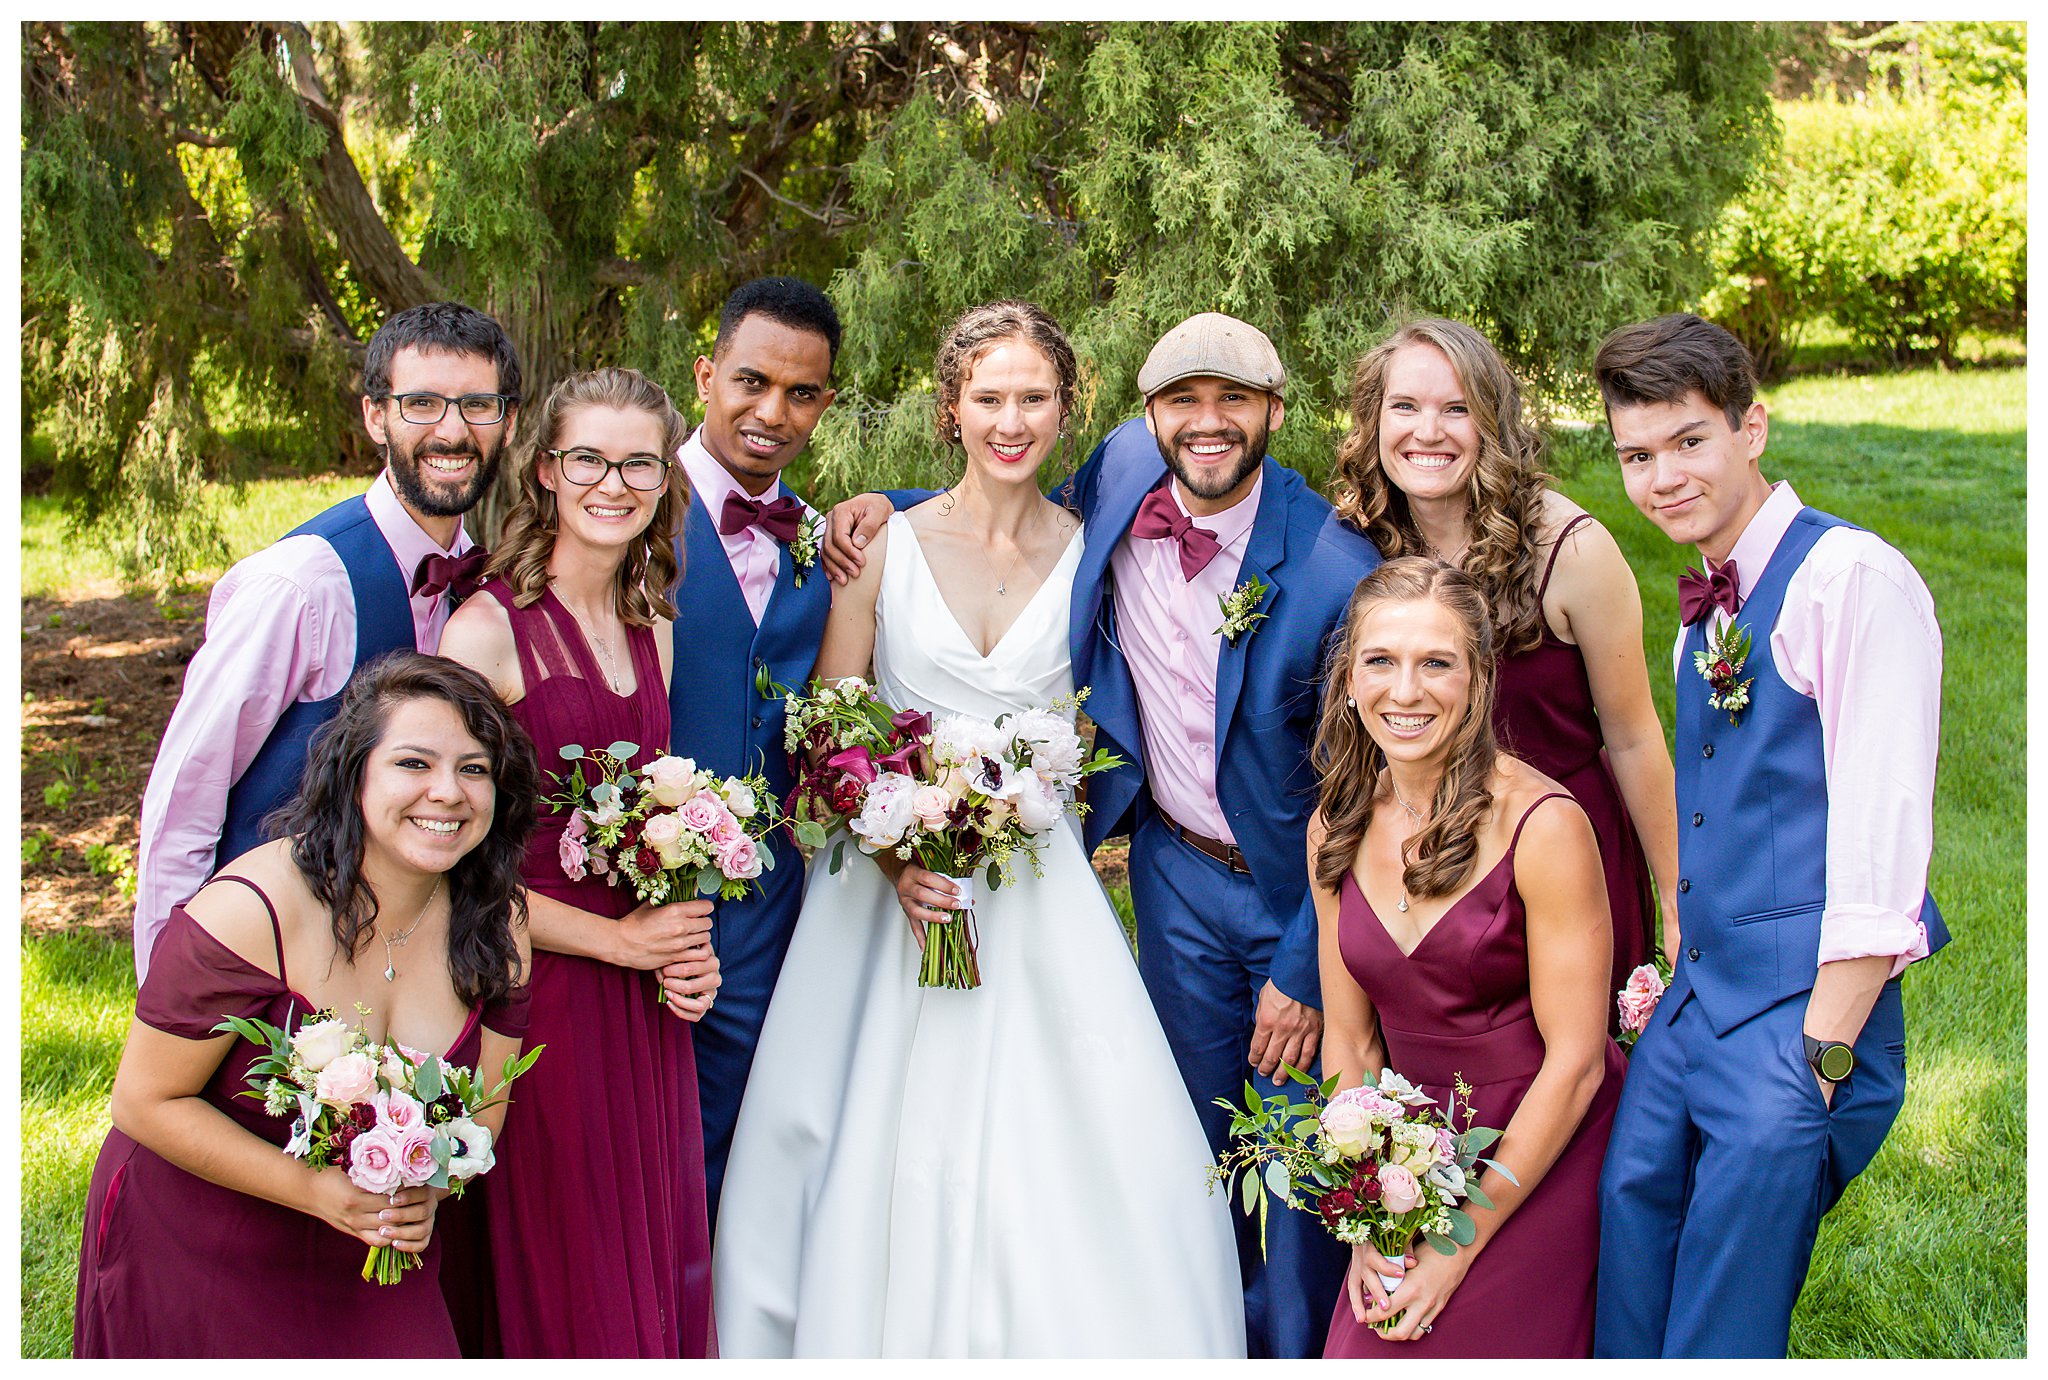 A bride and groom pose with their bridal party